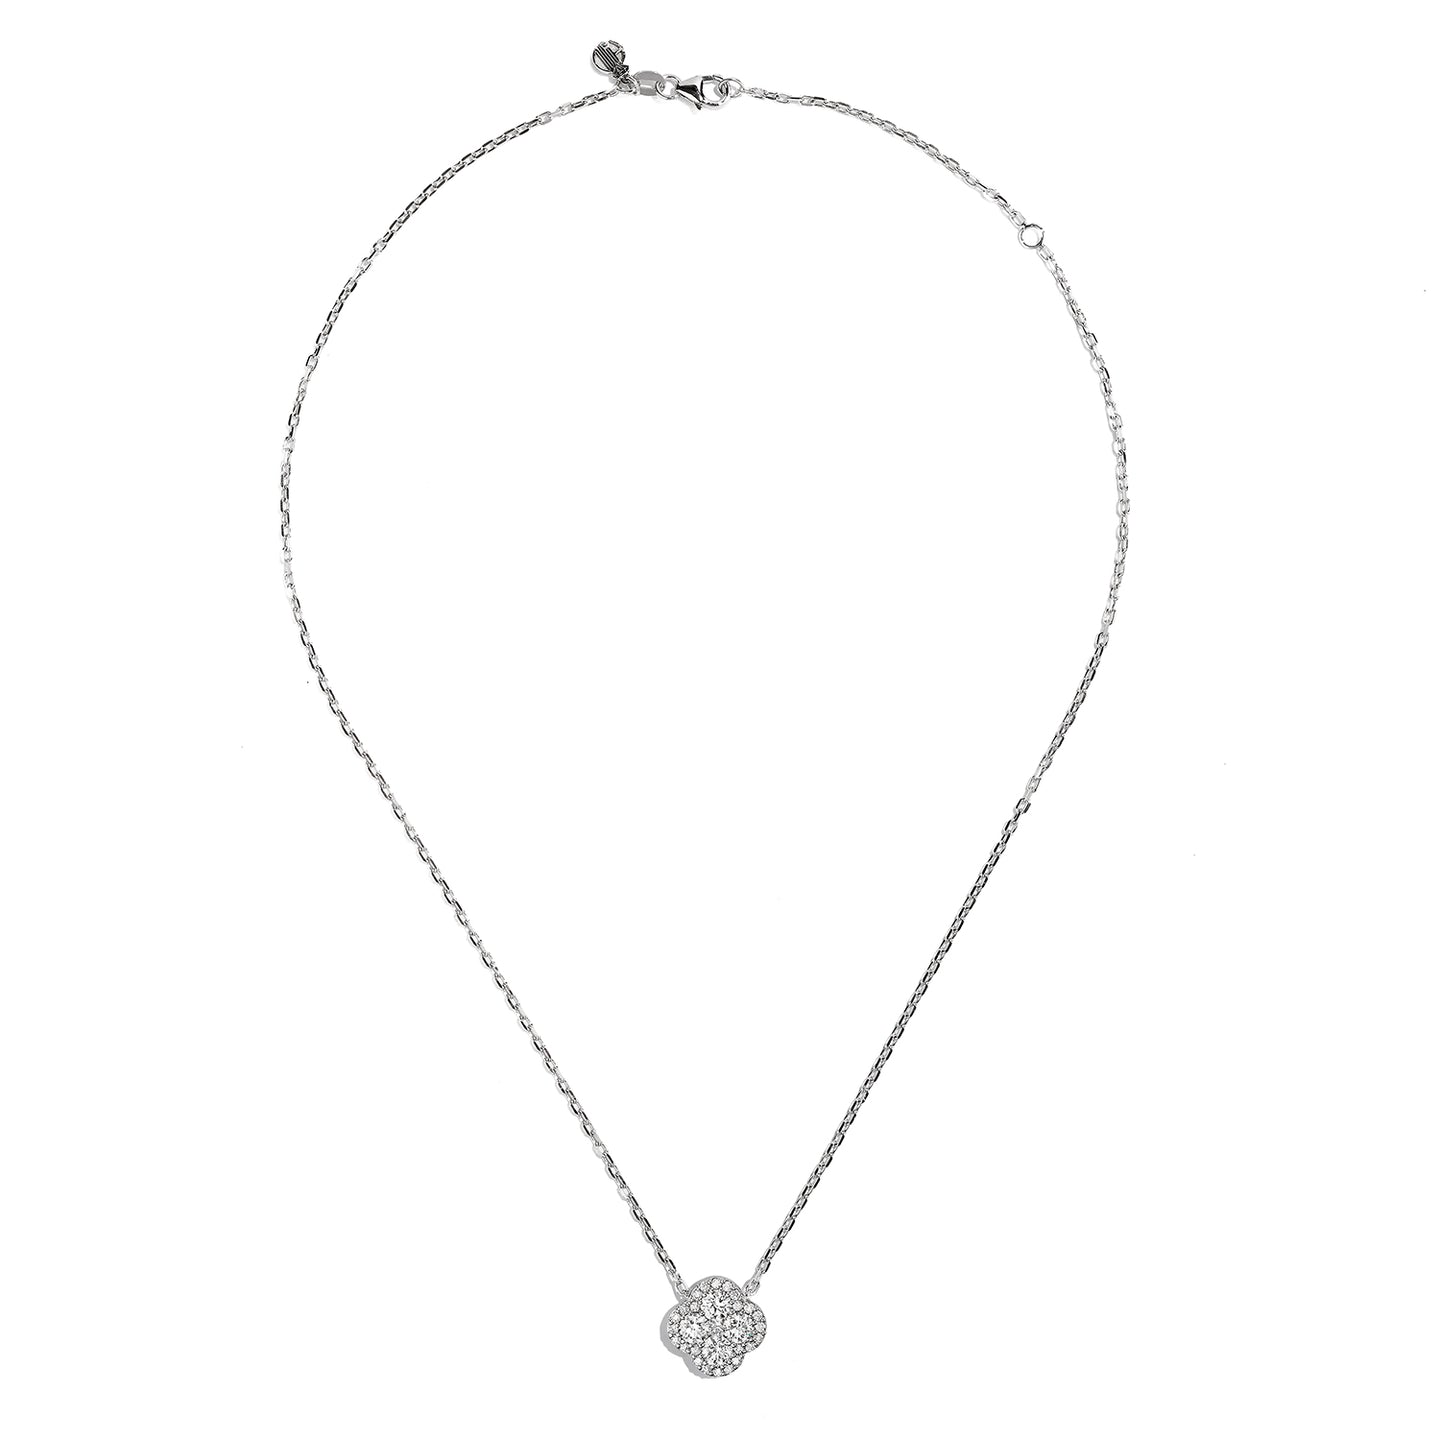 Sabel Collection 18K White Gold Round Diamond Clover Shape Necklace with Halo